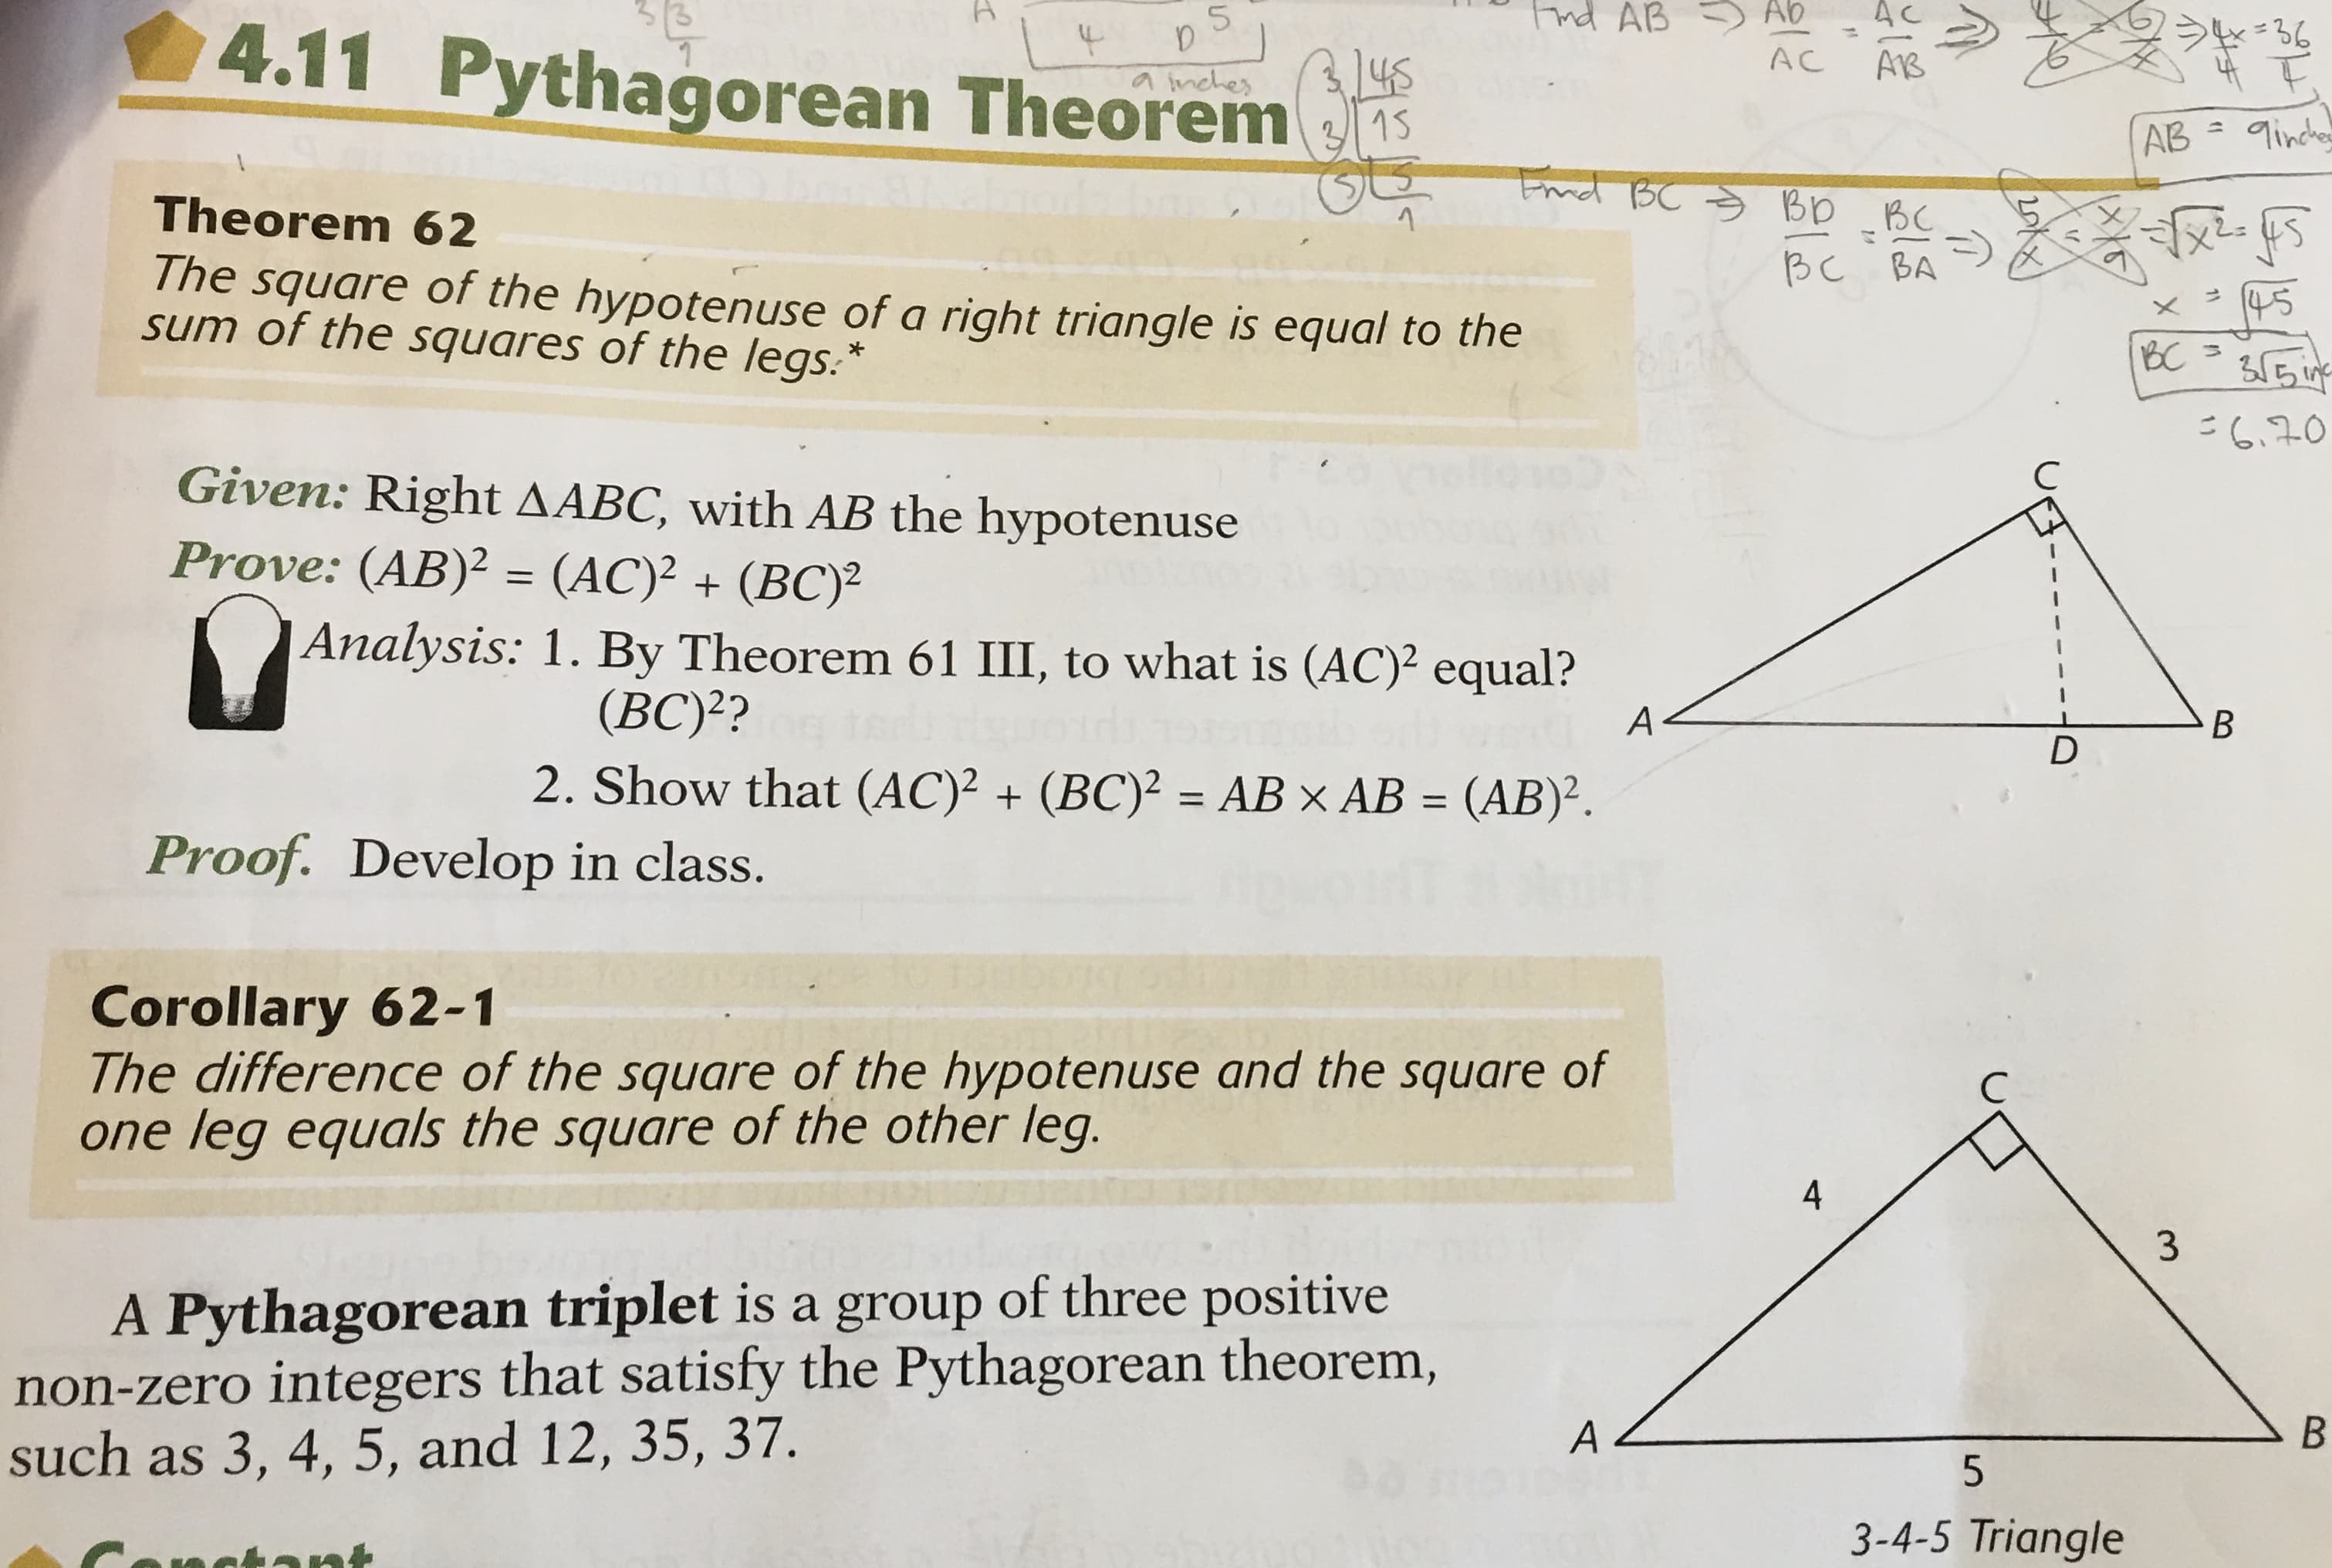 Fnd AB Ab
AC
>*=36
3,145
4.11 Pythagorean Theorem s
a inches
3/15
AB
9incher
Ernd BC S Bp _BC
Theorem 62
BC BA
The square of the hypotenuse of a right triangle is equal to the
sum of the squares of the legs.*
4.
BC
355i
こ640
Given: Right AABC, with AB the hypotenuse
Prove: (AB)² = (AC)² + (BC)²
Analysis: 1. By Theorem 61 III, to what is (AC)² equal?
(BC)??
2. Show that (AC)² + (BC)² = AB × AB = (AB)².
%3D
%3D
Proof. Develop in class.
Corollary 62-1
The difference of the square of the hypotenuse and the square of
one leg equals the square of the other leg.
4
A Pythagorean triplet is a group of three positive
non-zero integers that satisfy the Pythagorean theorem,
such as 3, 4, 5, and 12, 35, 37.
A<
5
3-4-5 Triangle
ant
